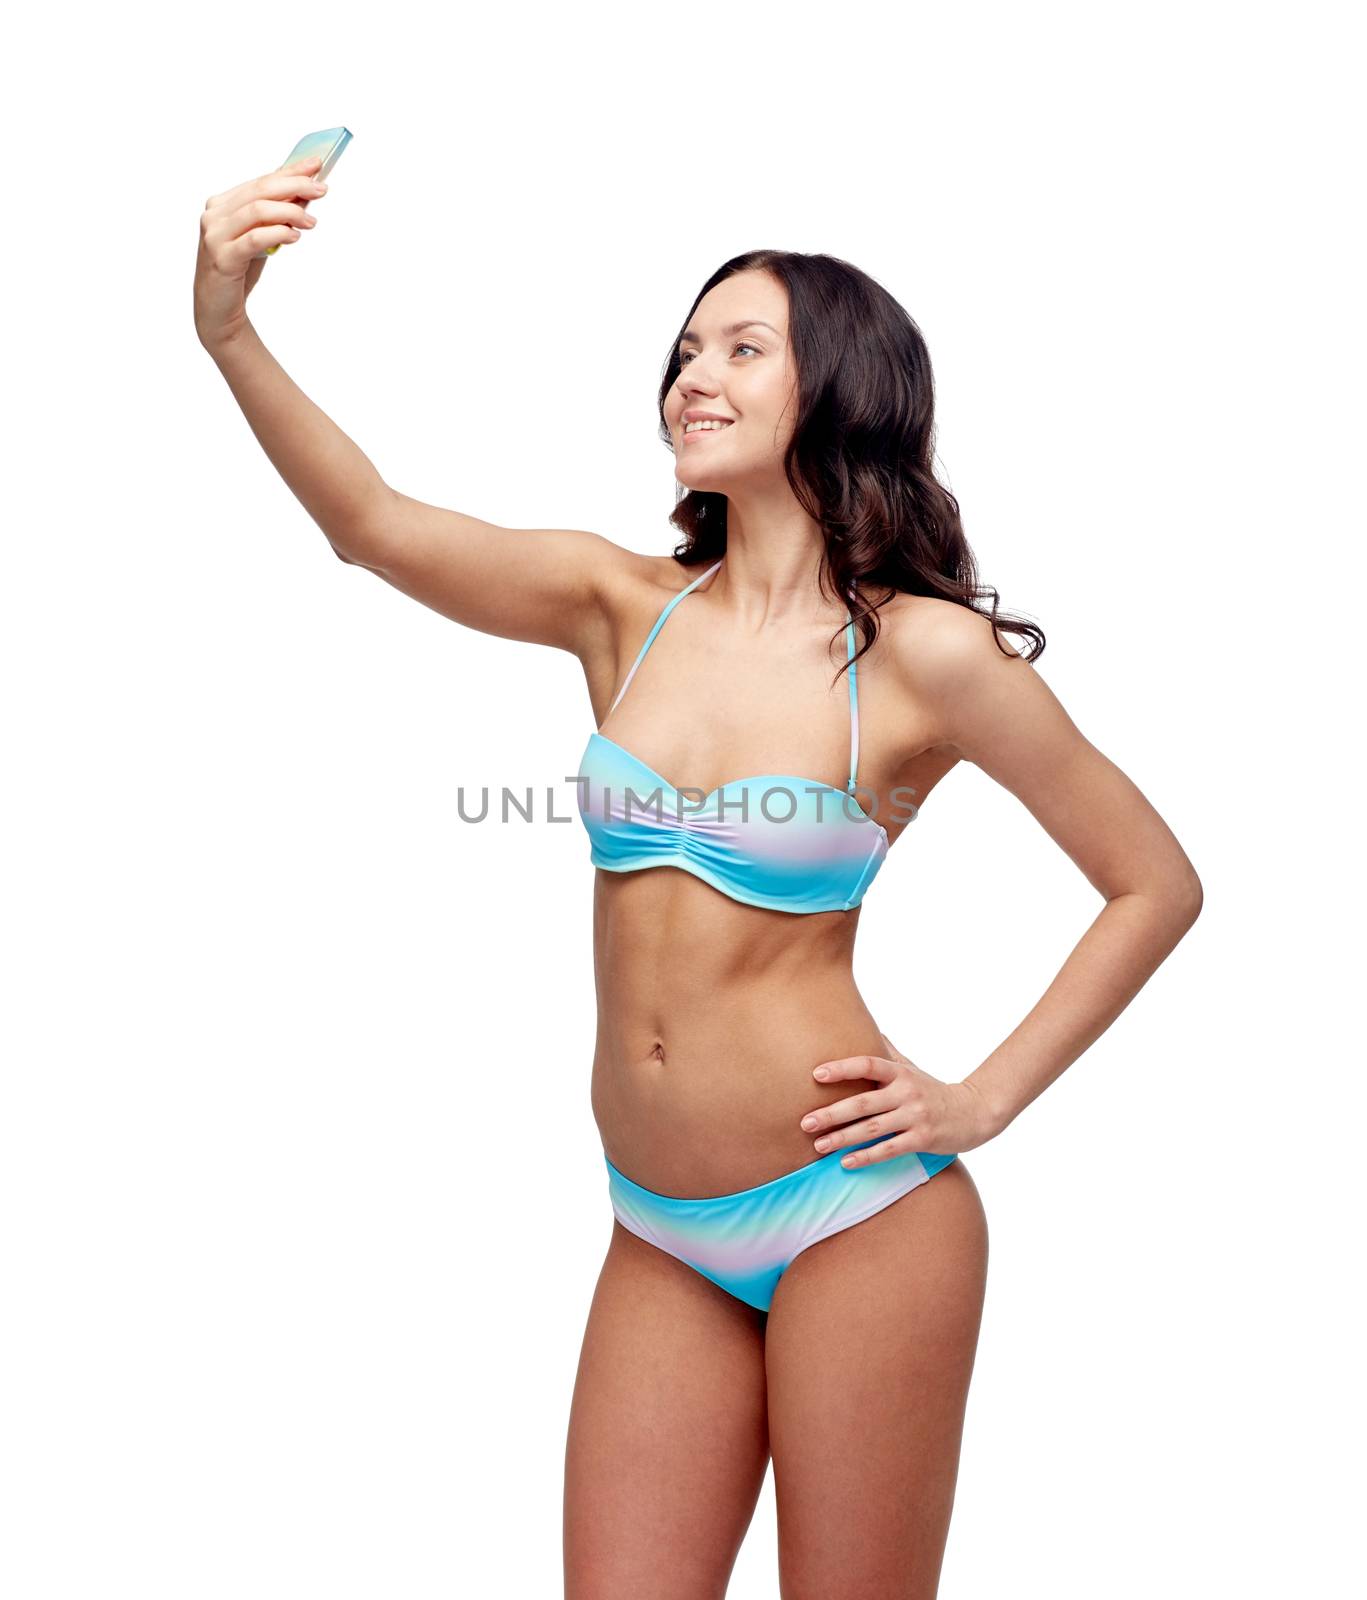 people, technology, summer and beach concept - happy young woman in bikini swimsuit taking selfie with smatphone